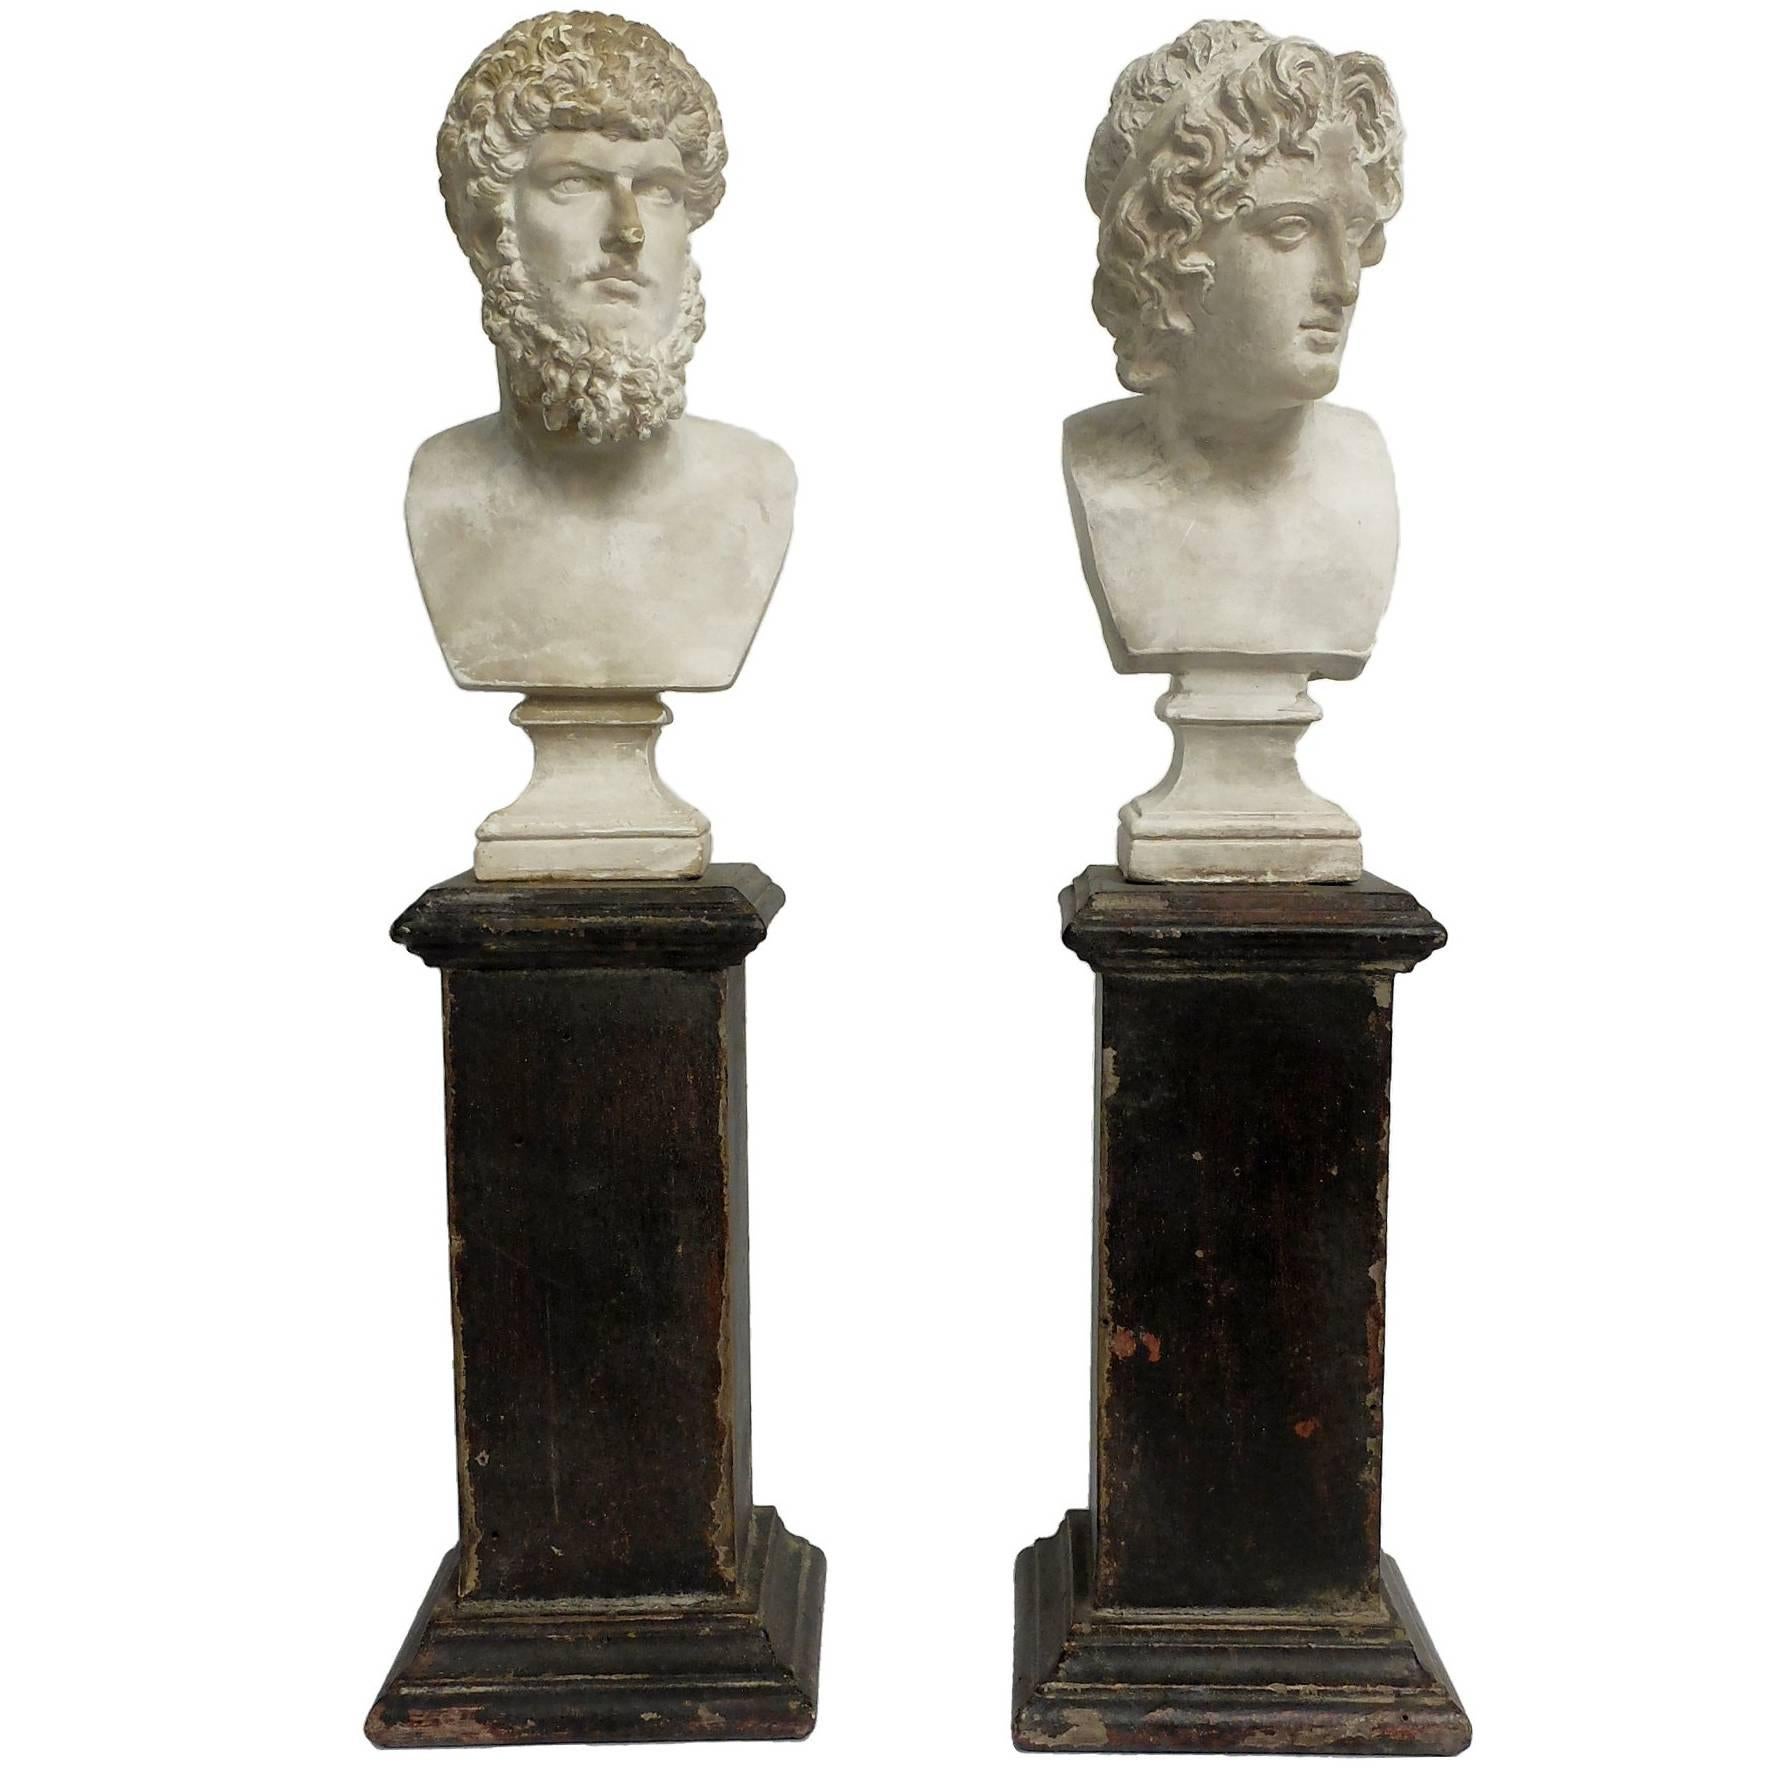 Pair of Academic Cast of Plaster Busts Depicting Lucius Verus and Alexander